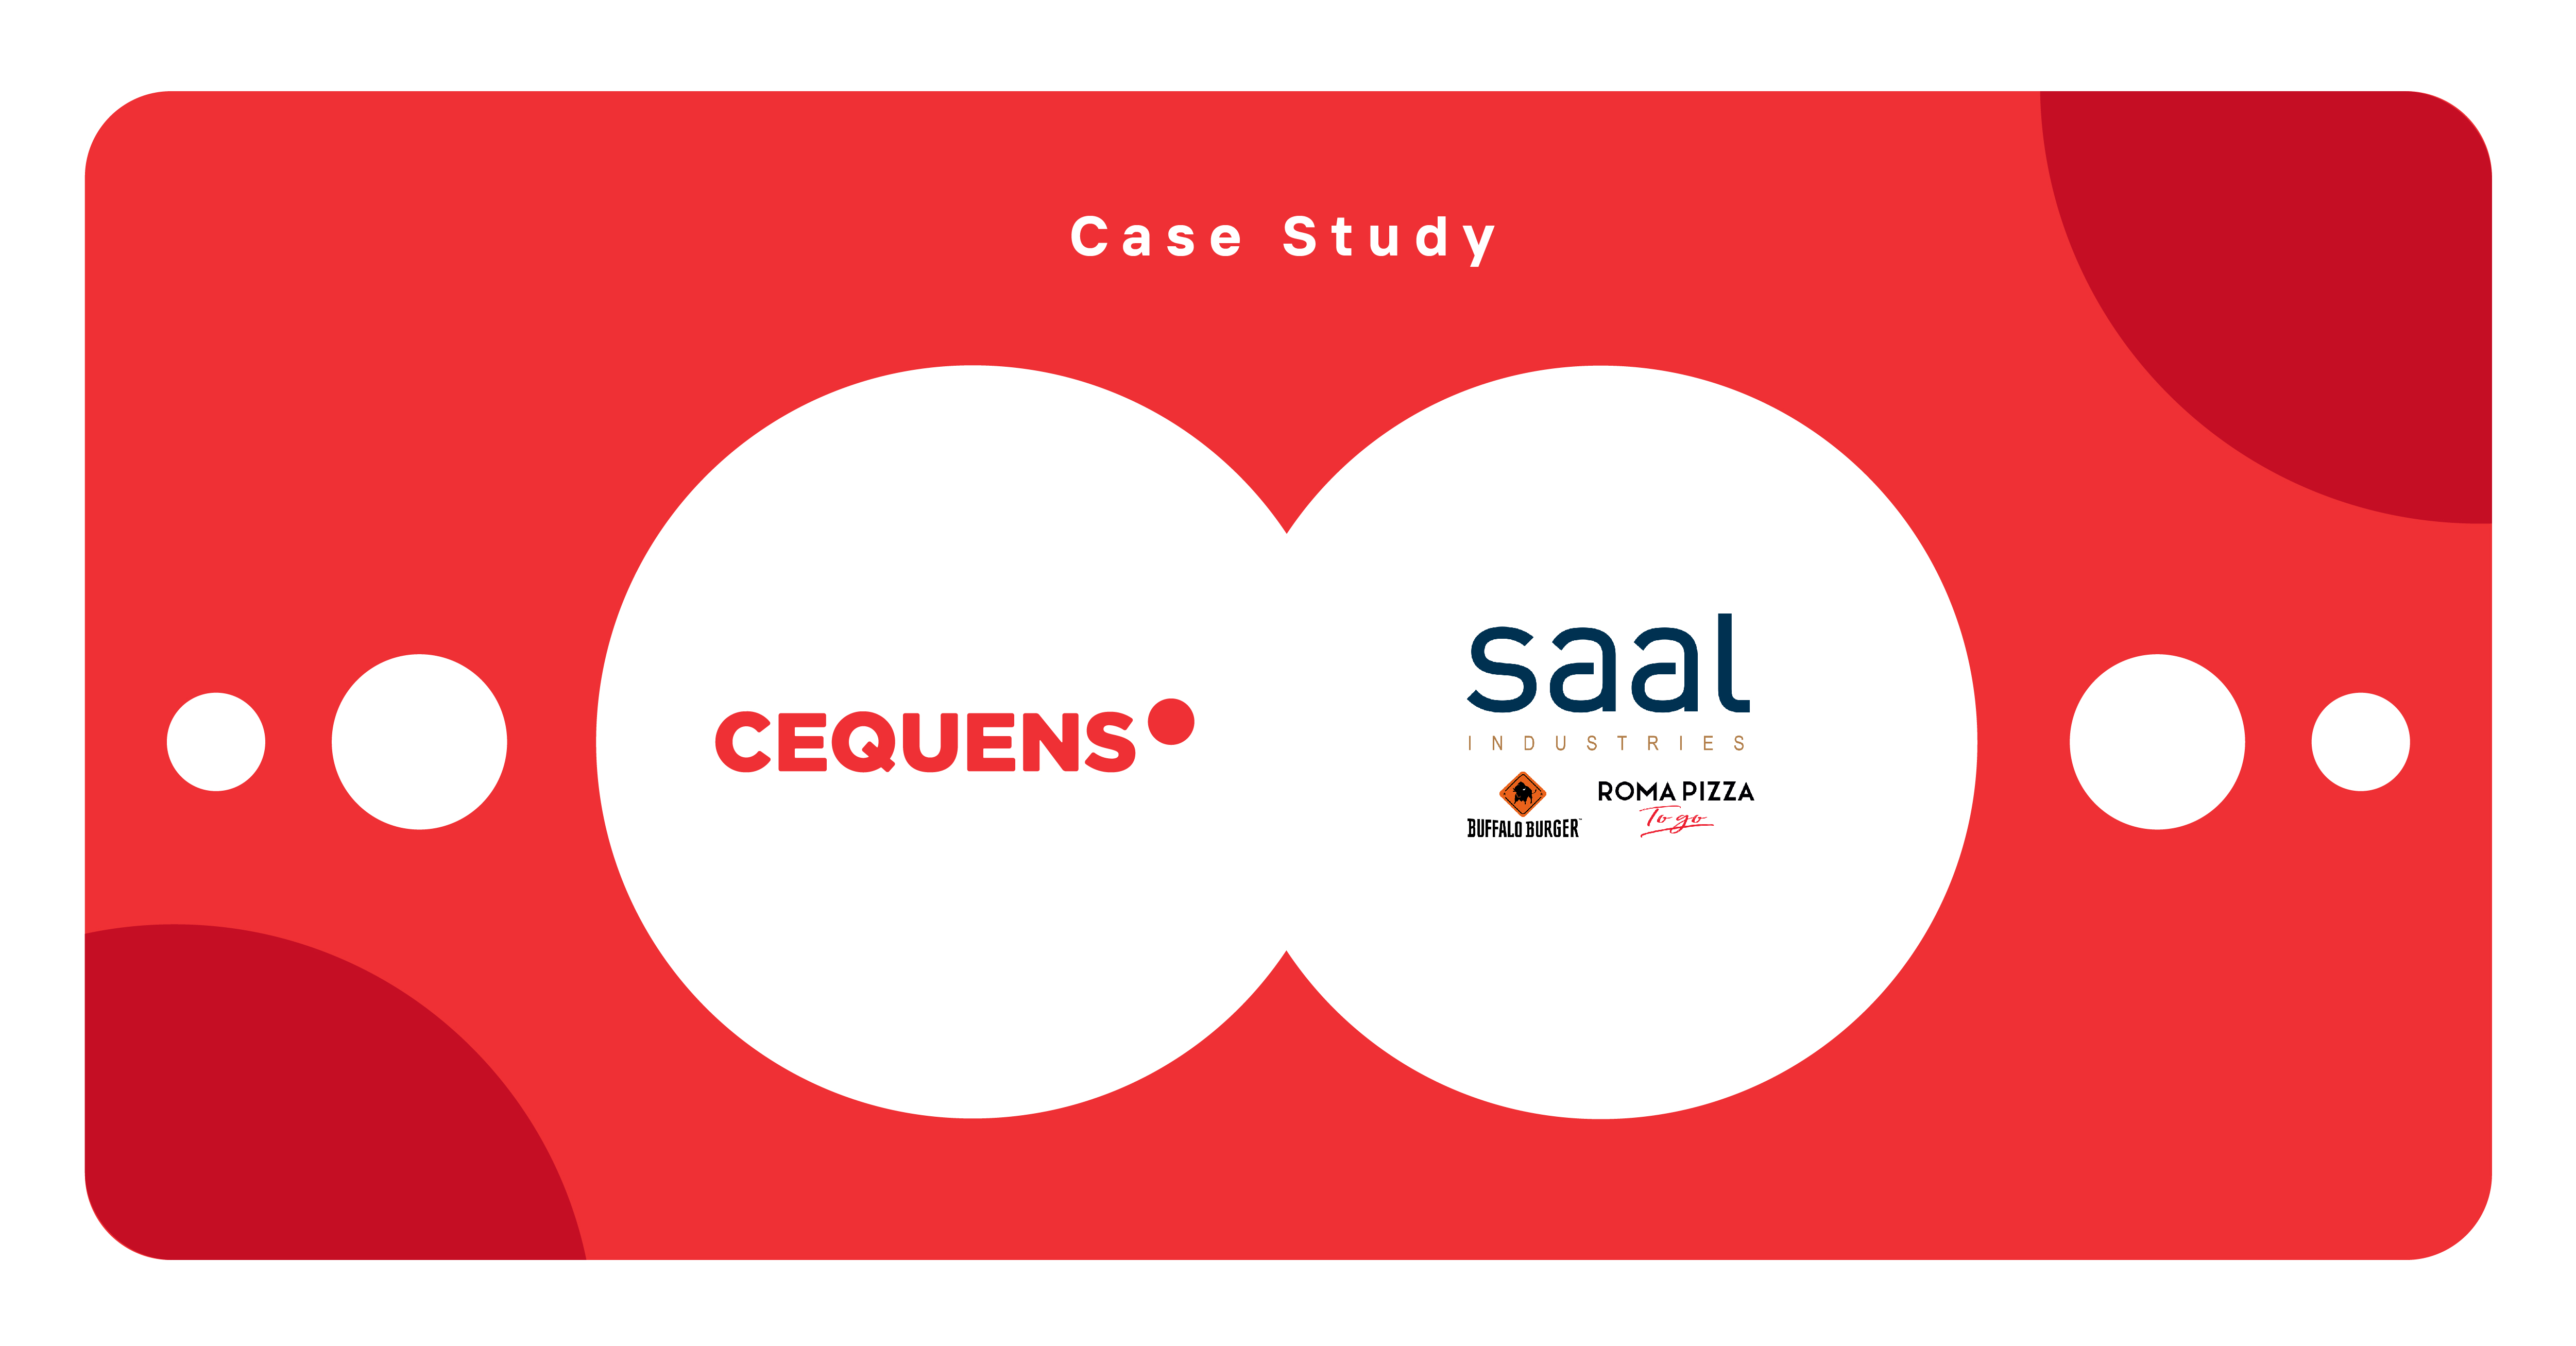 CEQUENS and SAAL Invest logos